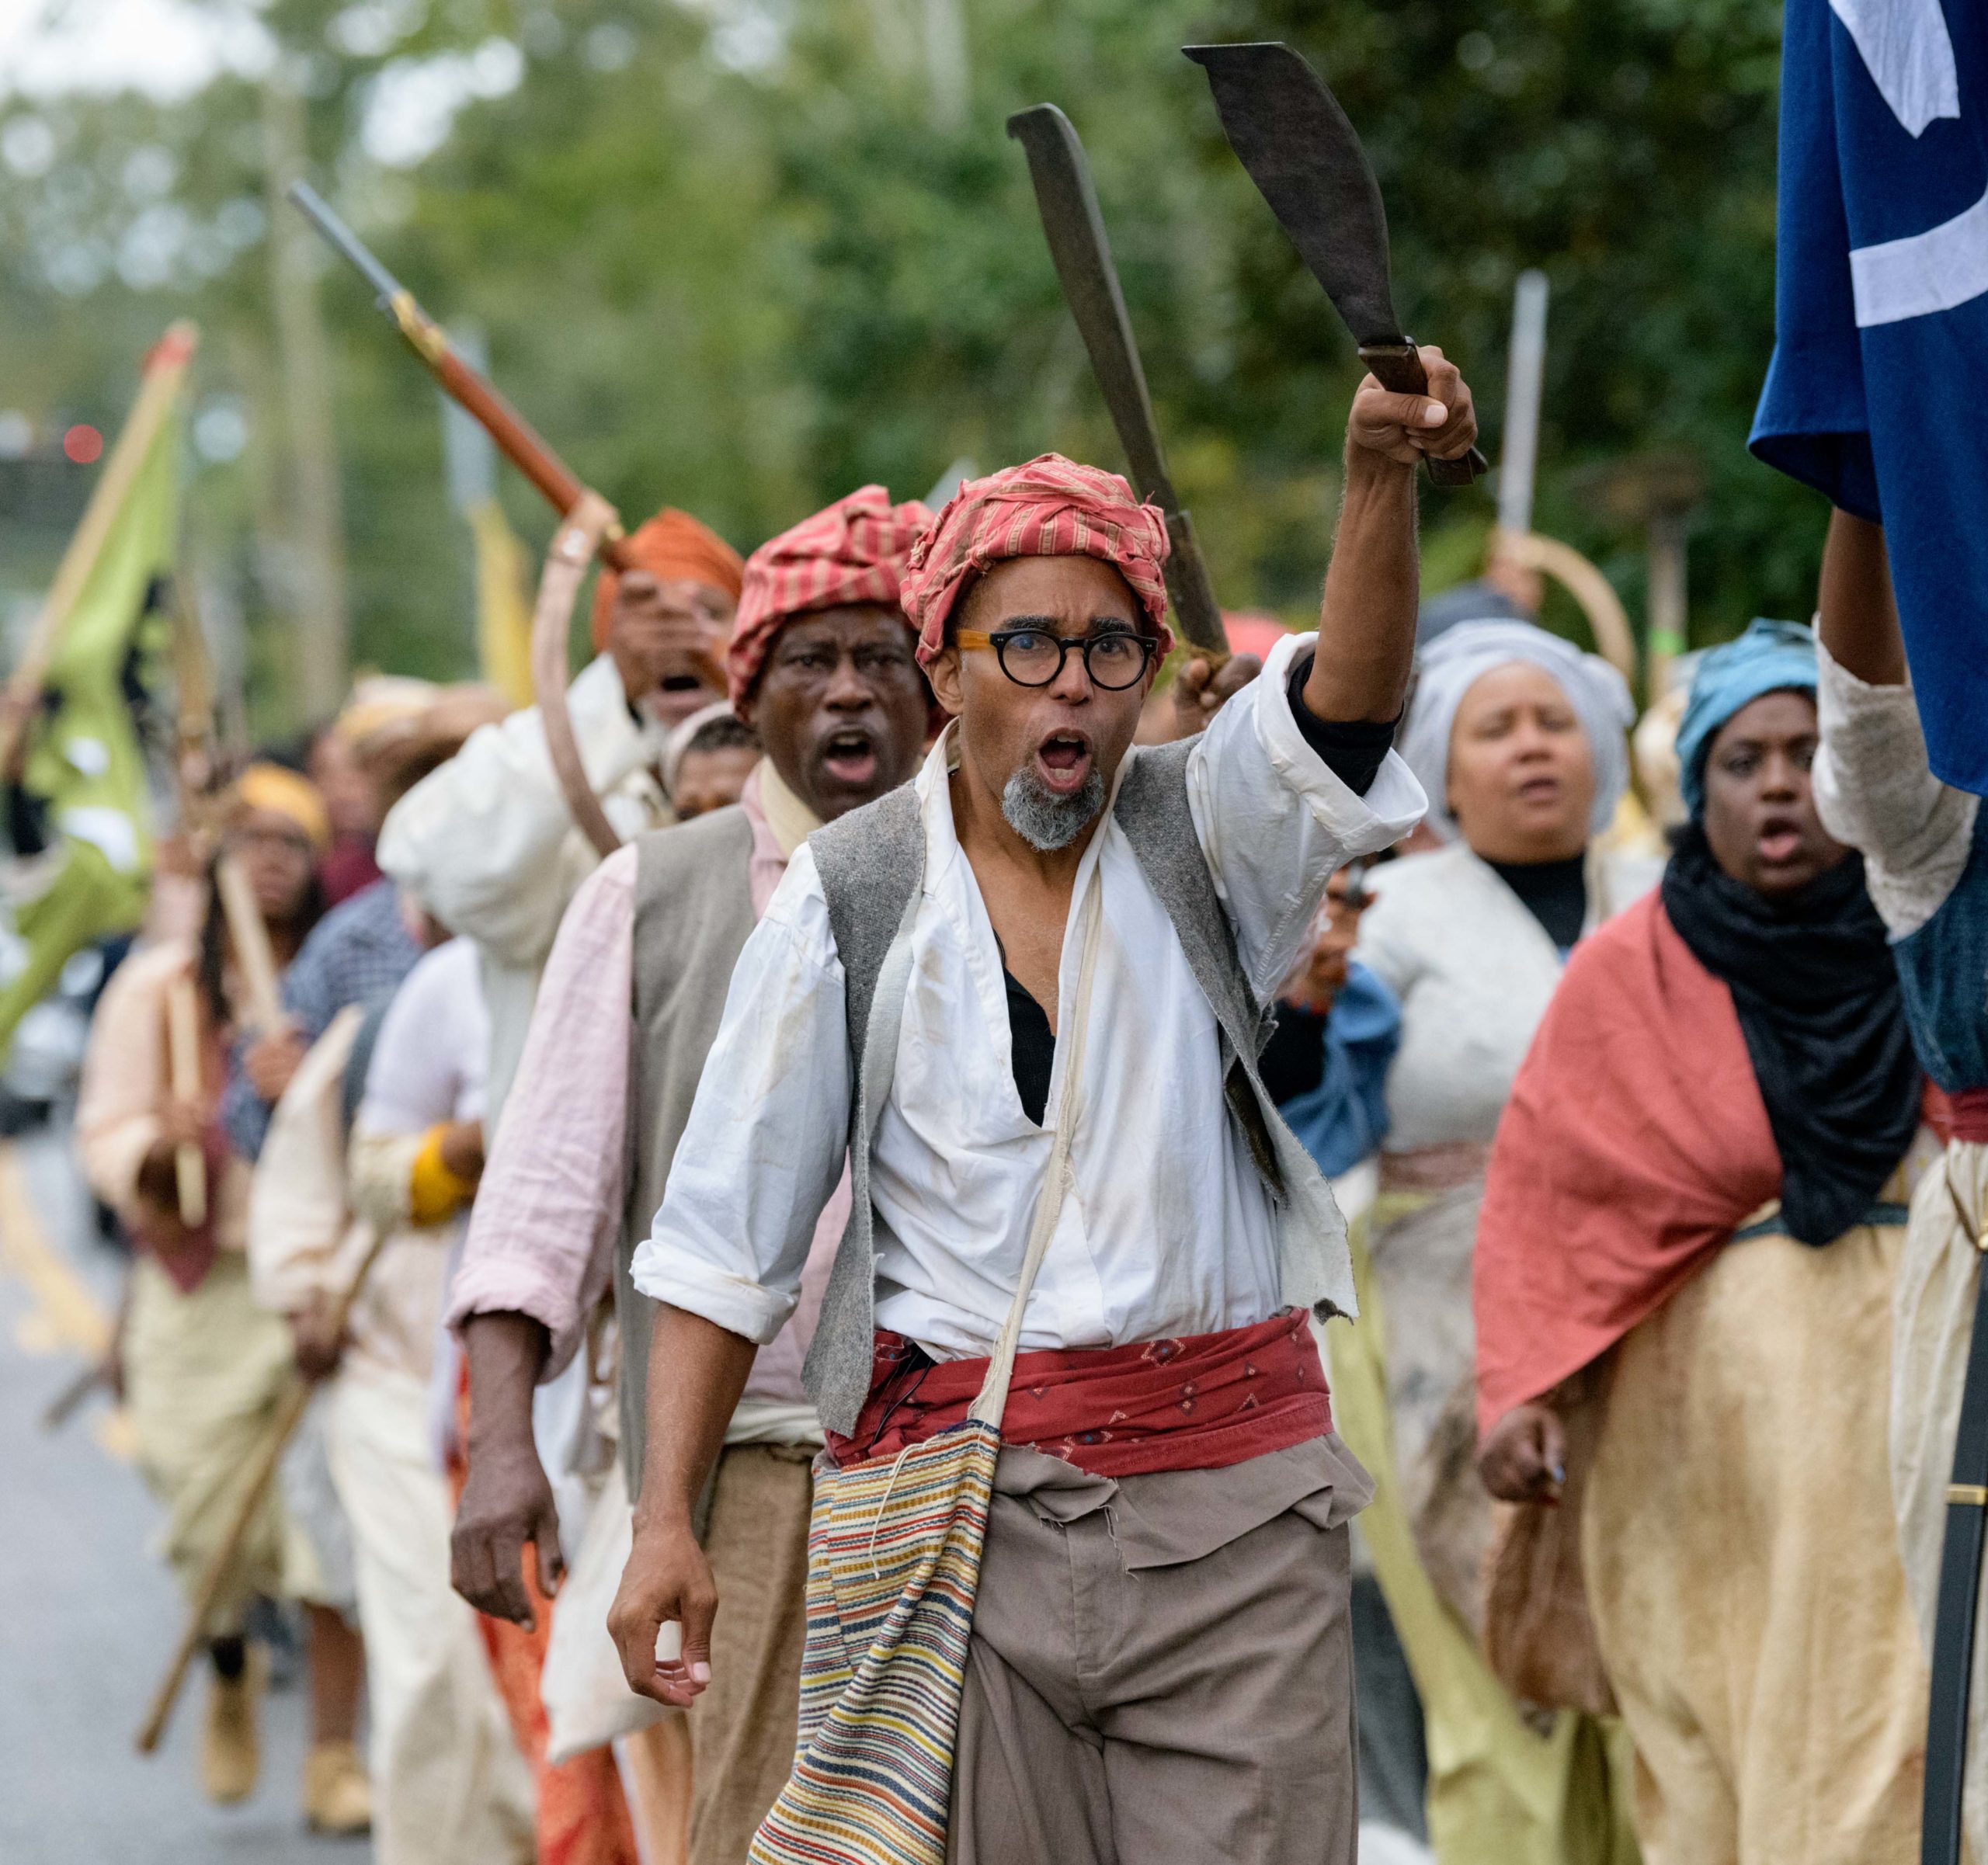 Lead by artist Dread Scott, wearing red sash, a group of re-enactors recreate the largest slave revolt in United States history, the German Coast Uprising of 1811 in LaPlace, Louisiana, Friday, Nov. 8, 2019 with shouts of “On to New Orleans! Freedom or Death!” In 1811 Charles Deslondes led a group who attacked slave owner Manual Andry at his plantation, which still stands and is called Woodland Plantation now. John McCusker recreated Andry and was attacked at the plantation while another plantation owner recreated an attack on the Mississippi River levee in LaPlace. The rebellion got as far as modern-day Kenner, Louisiana before troops from New Orleans forced the 500 slaves back and captured many of them. Over 50 of the rebels were sentenced to death and beheaded with their heads place on pikes along the river levee while others were placed in the French Quarter in New Orleans. Dread Scott didn’t learn of the slave rebellion until recently as the rebellion is mostly unknown even to residents of St. John Parish, but Scott feels it’s important for people to know that many slaves were not passive and fought for their freedom throughout history. Photo by Matthew Hinton